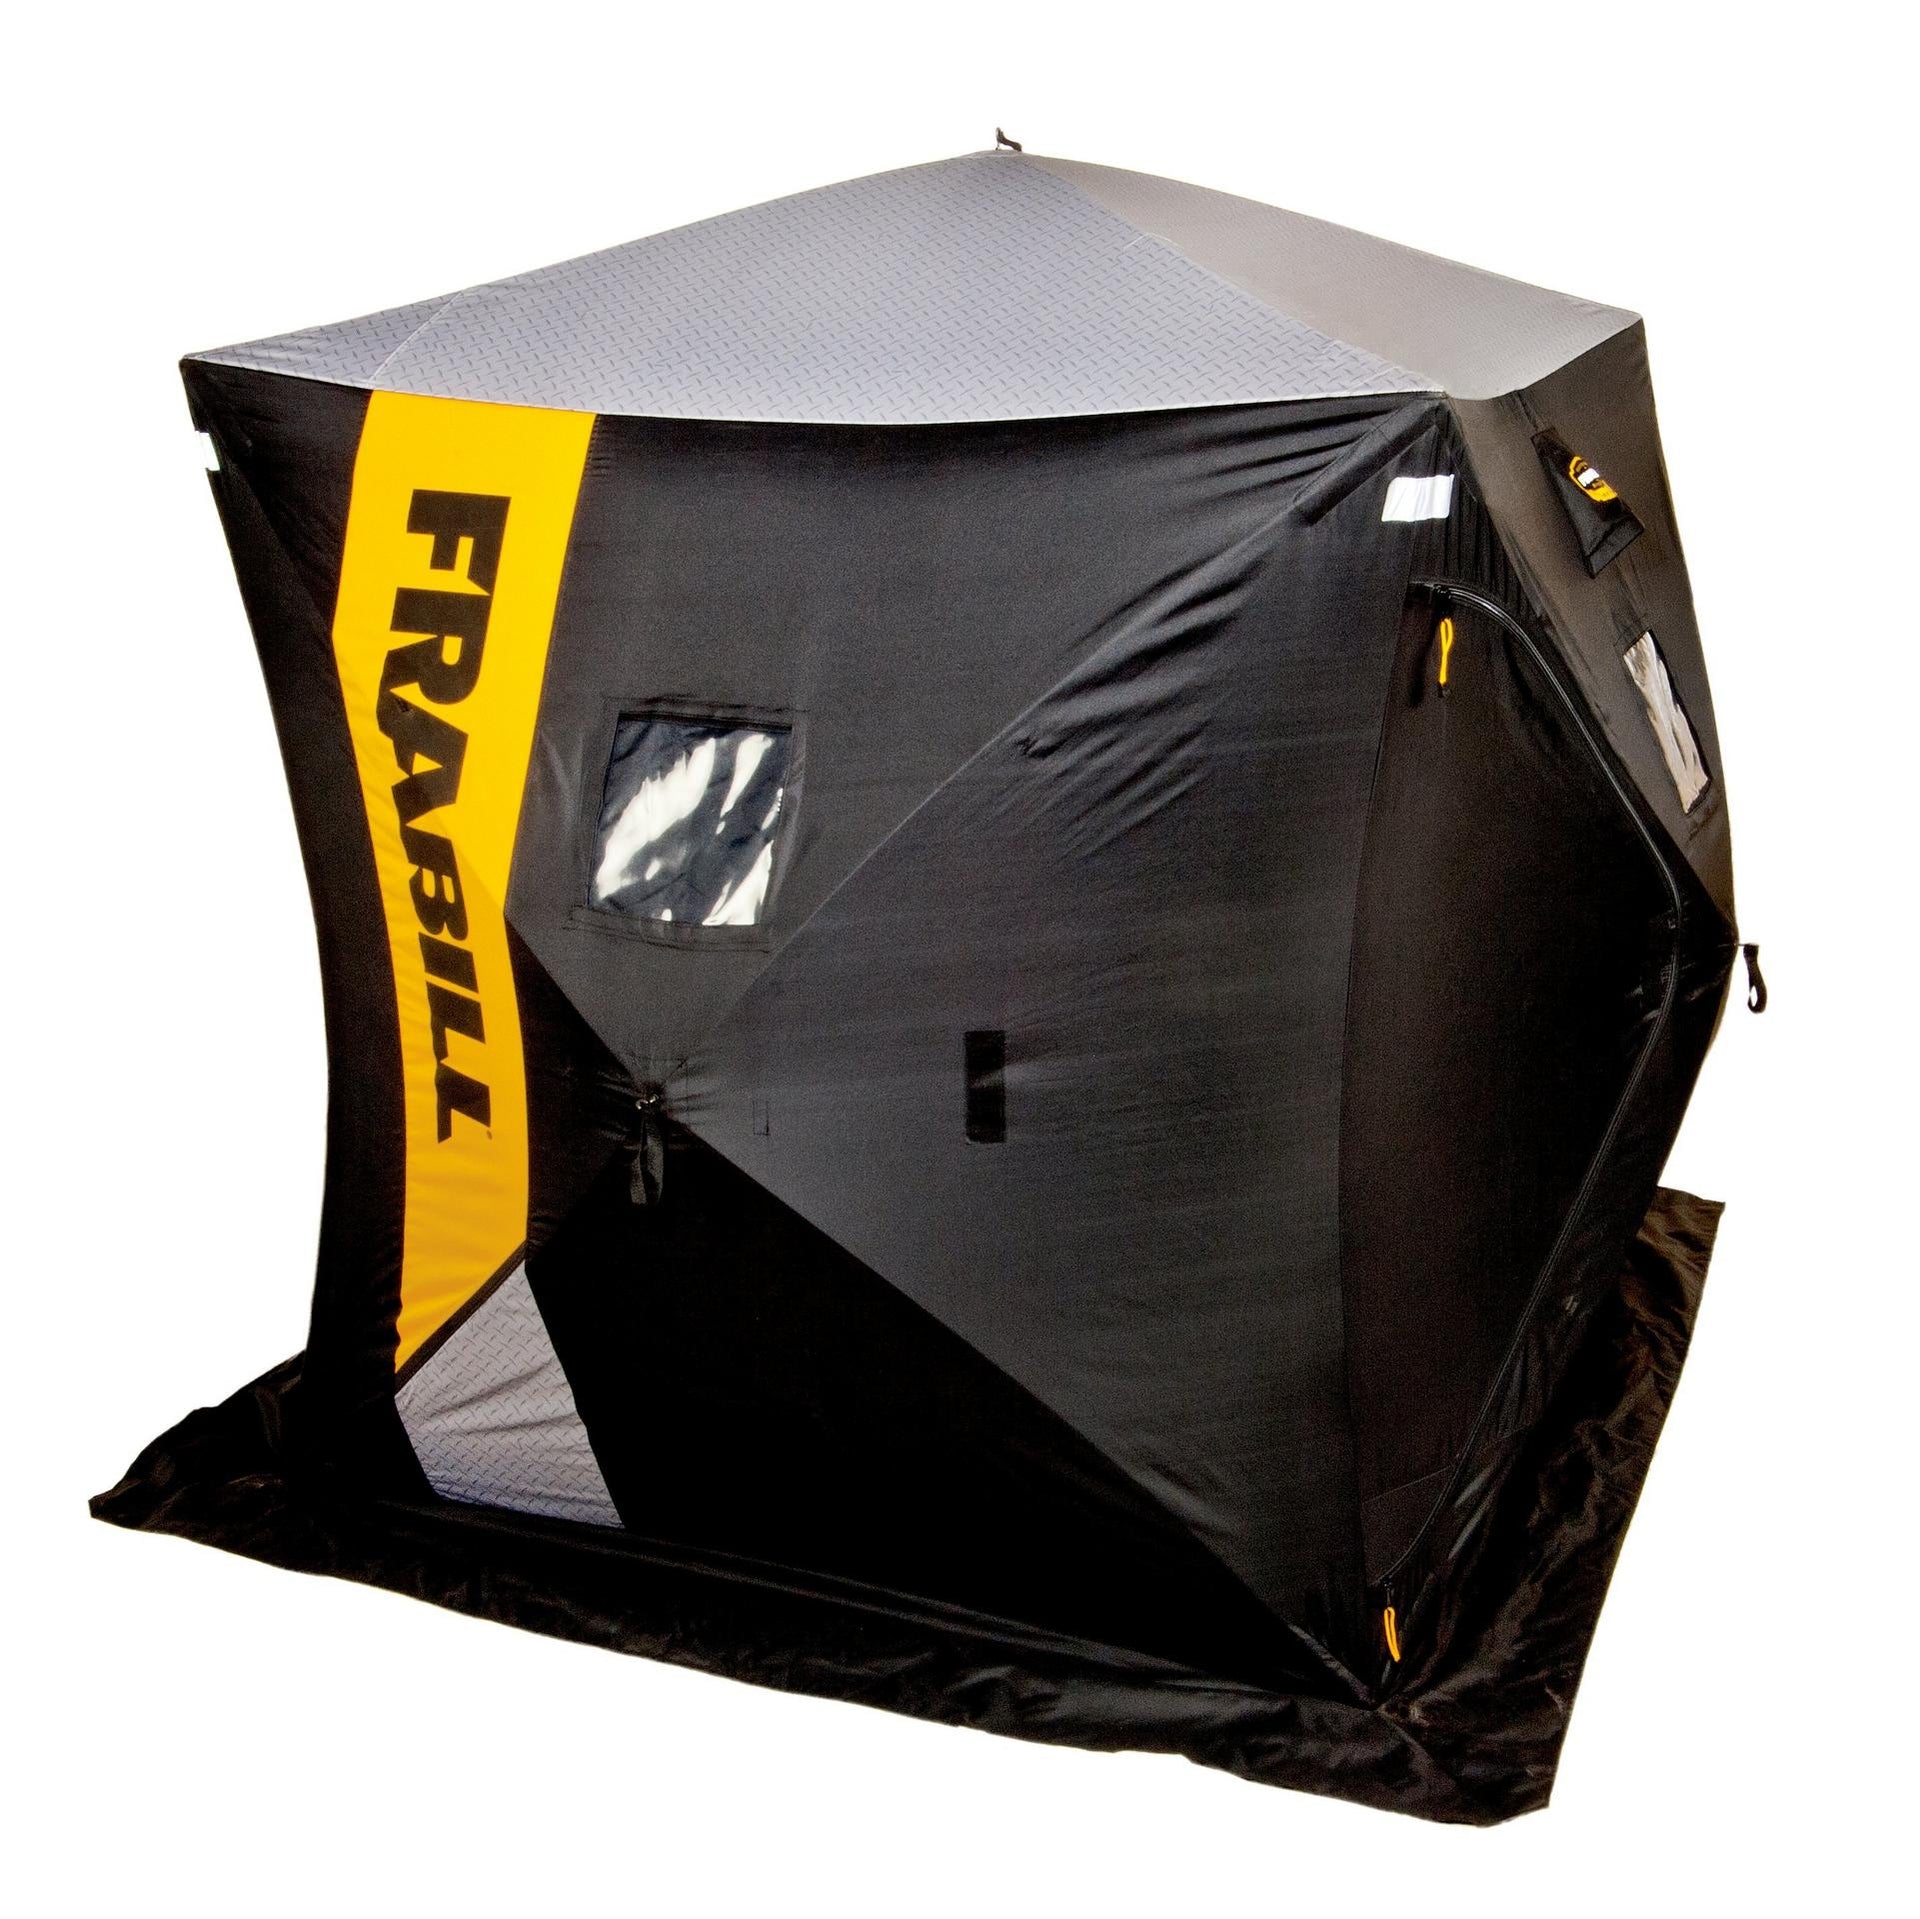 Ice Fishing Tents and Shelters